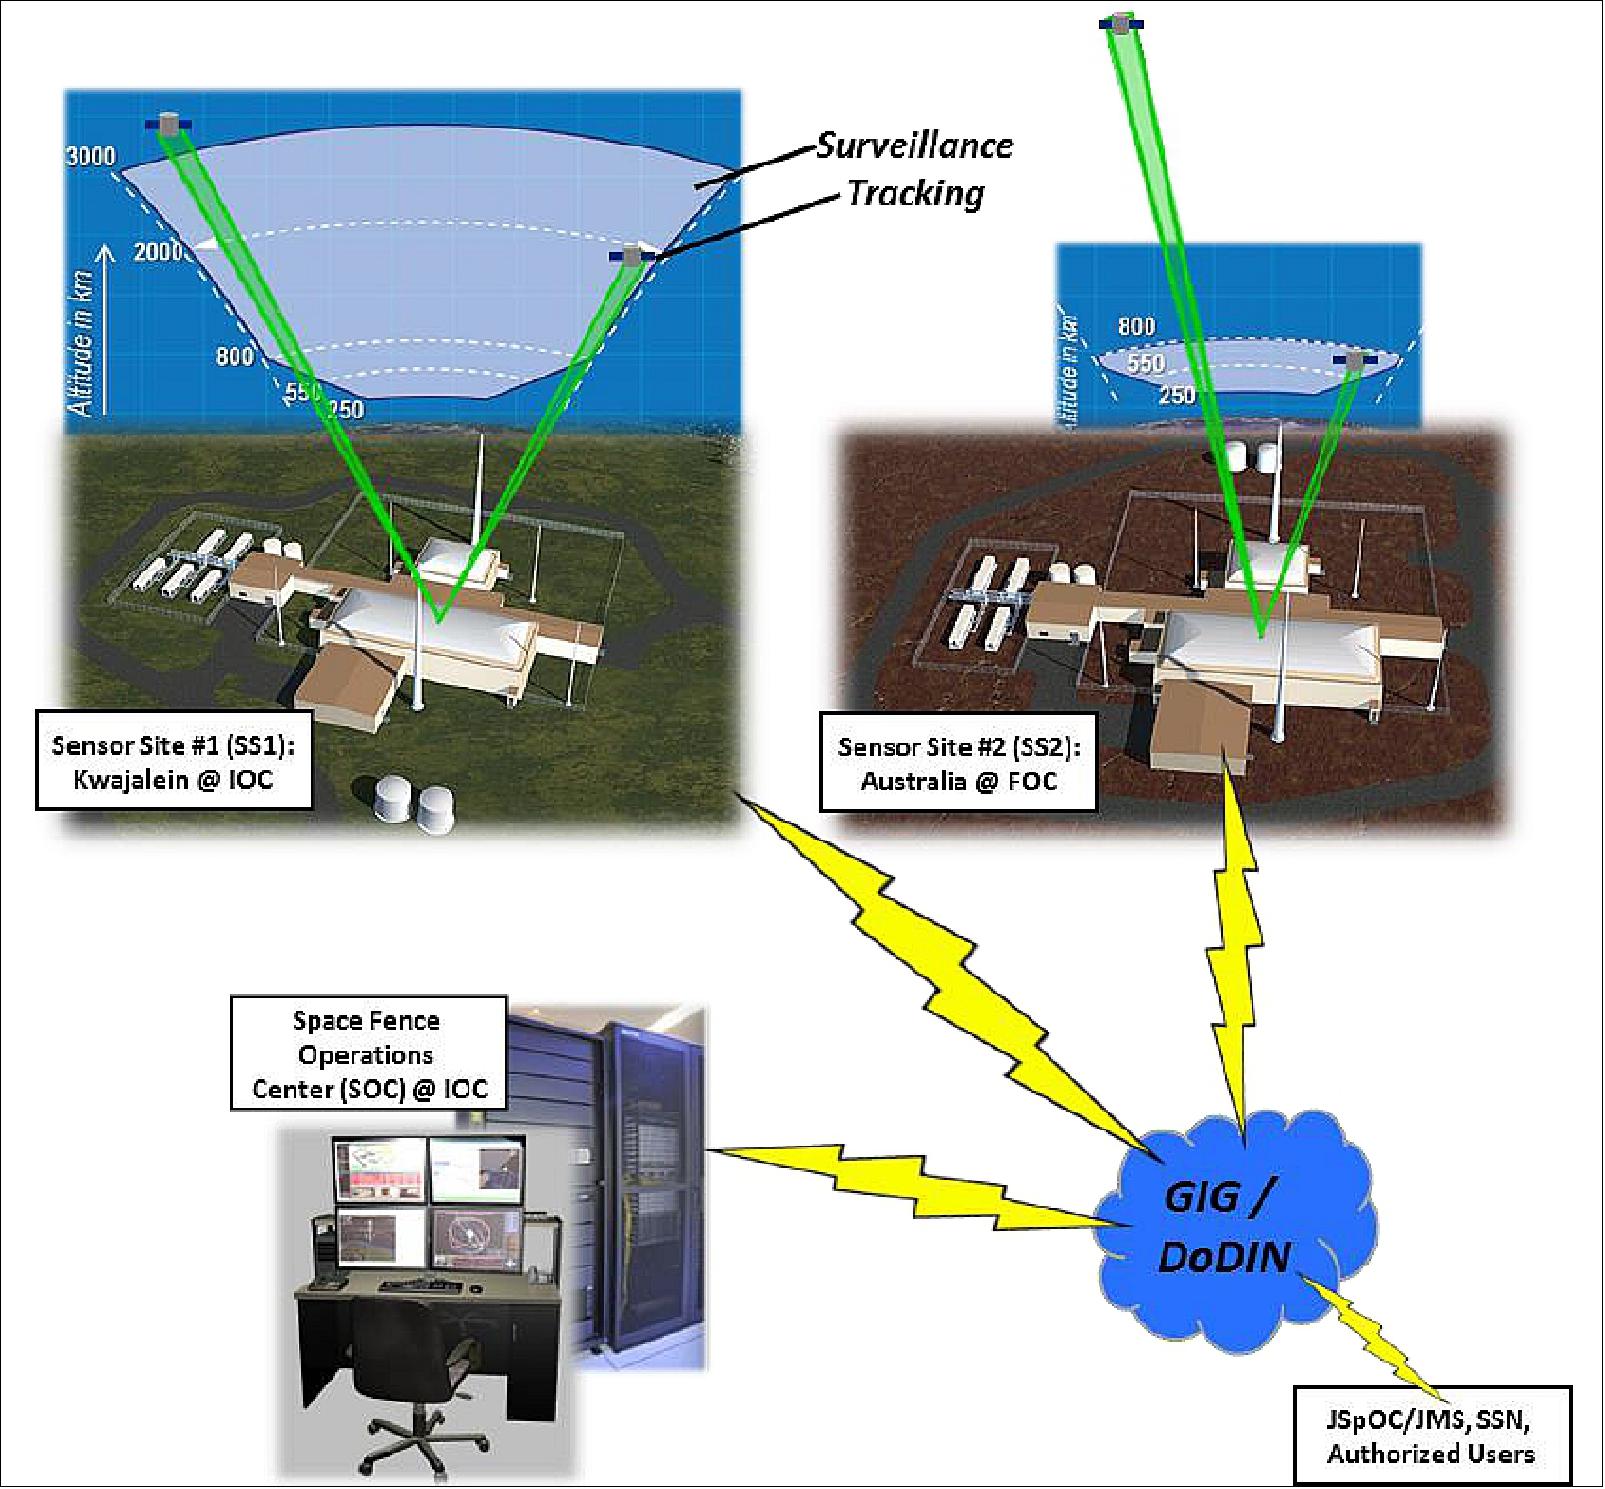 Figure 8: Space Fence System Architecture and Coverage (image credit: Lockheed Martin, Ref. 21)